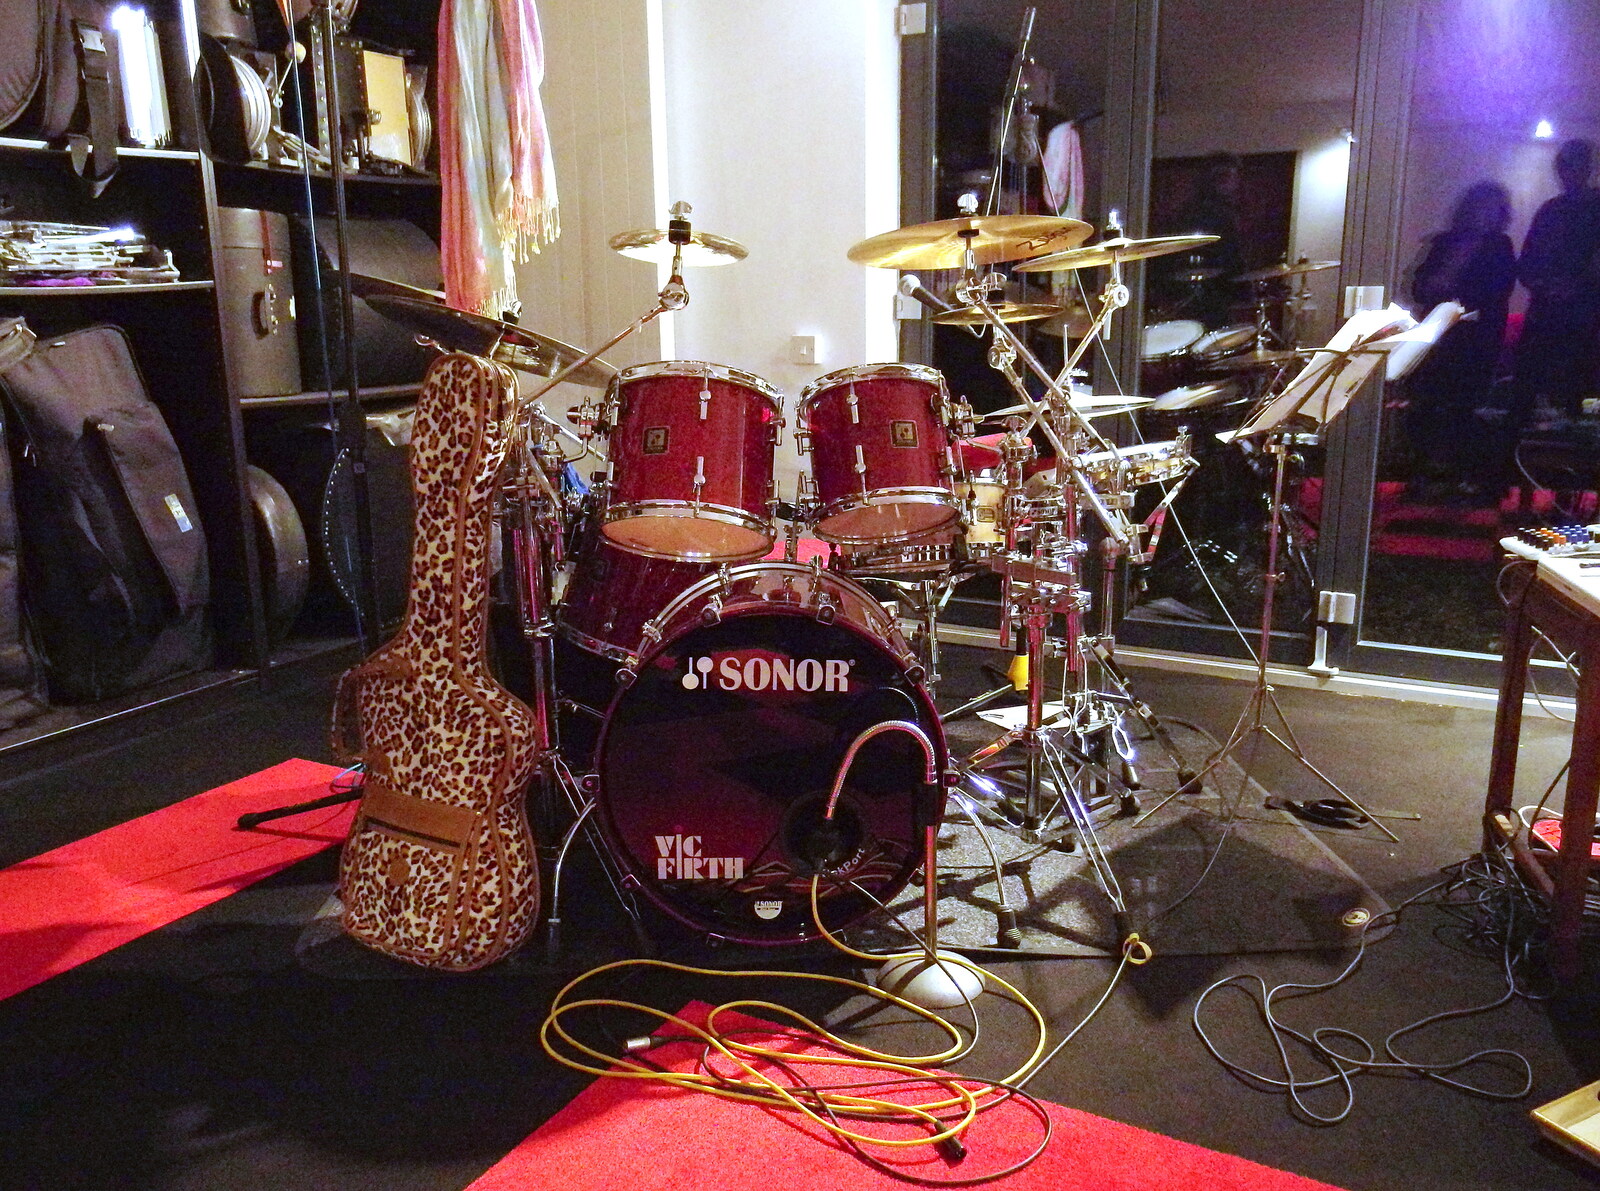 Henry's kit and Rob's leopard-skin guitar case from Saturday Café Life, Diss, Norfolk - 14th December 2013